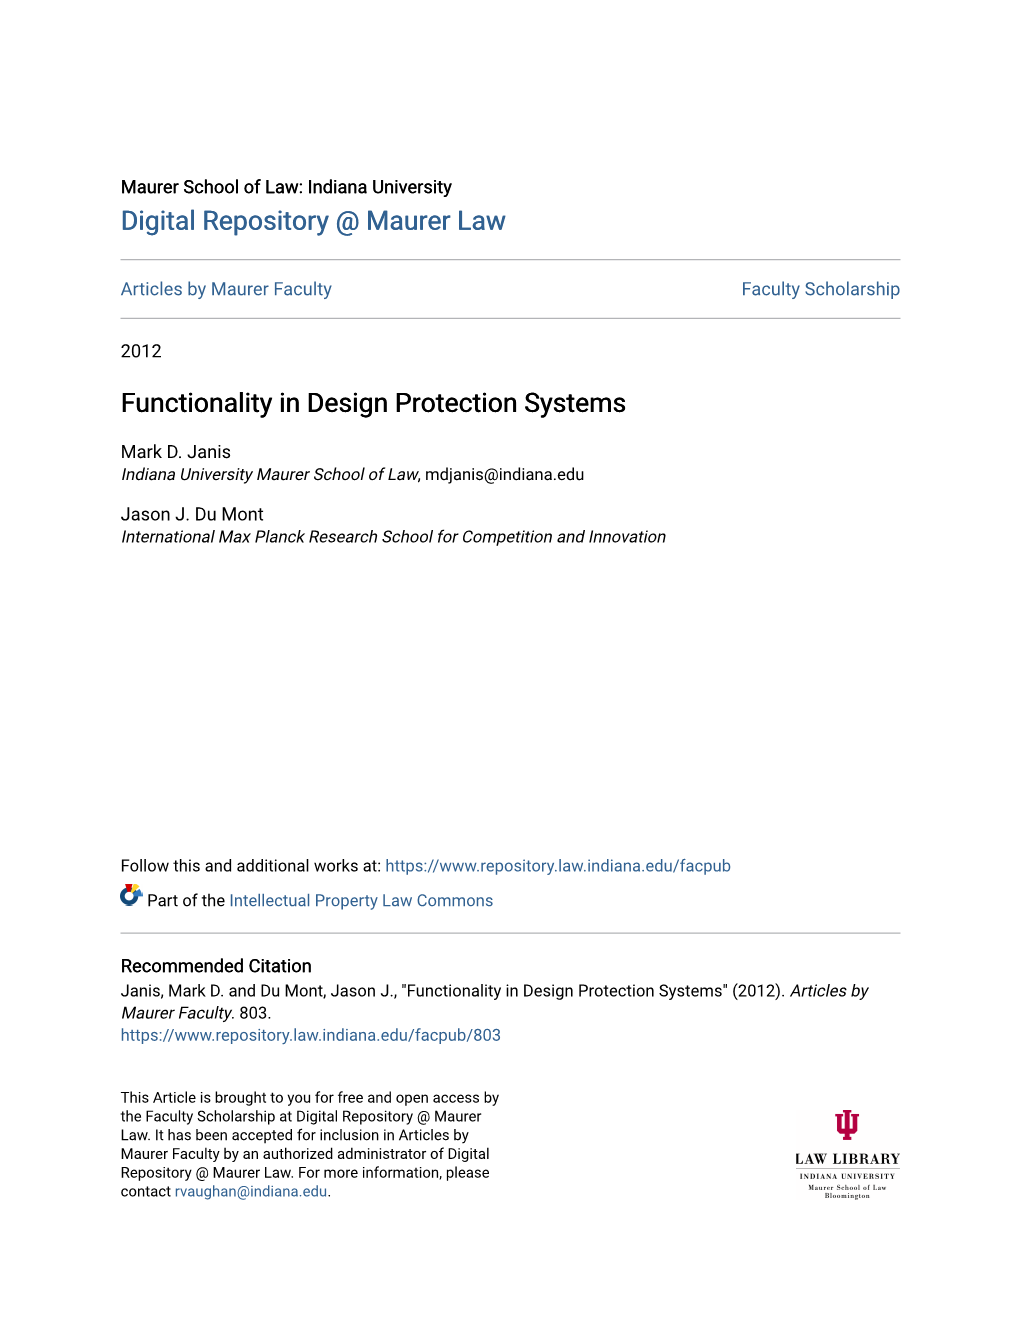 Functionality in Design Protection Systems